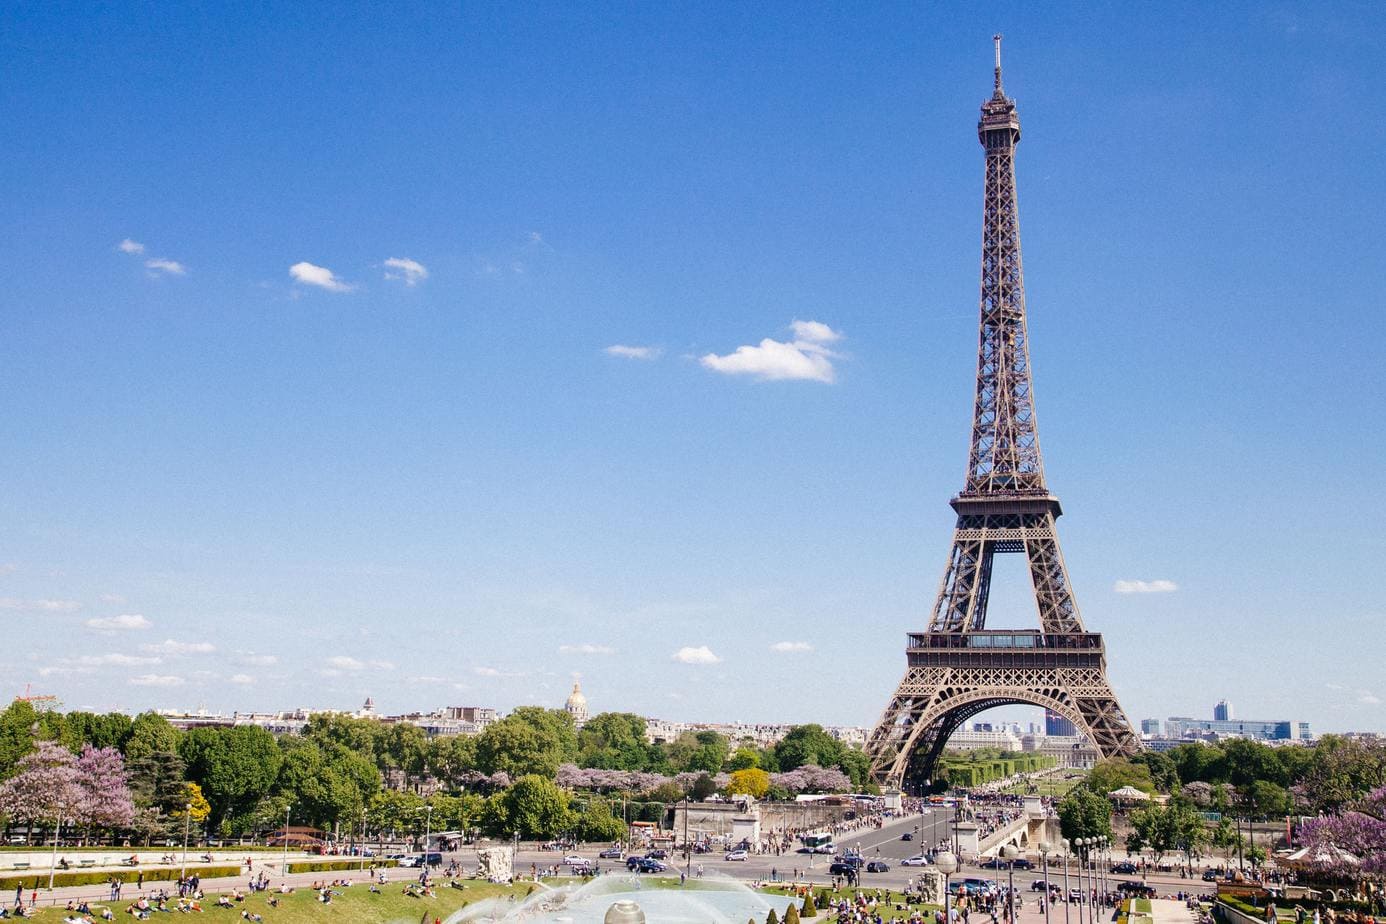 14 interesting facts about the Eiffel Tower – did you have any idea about them?